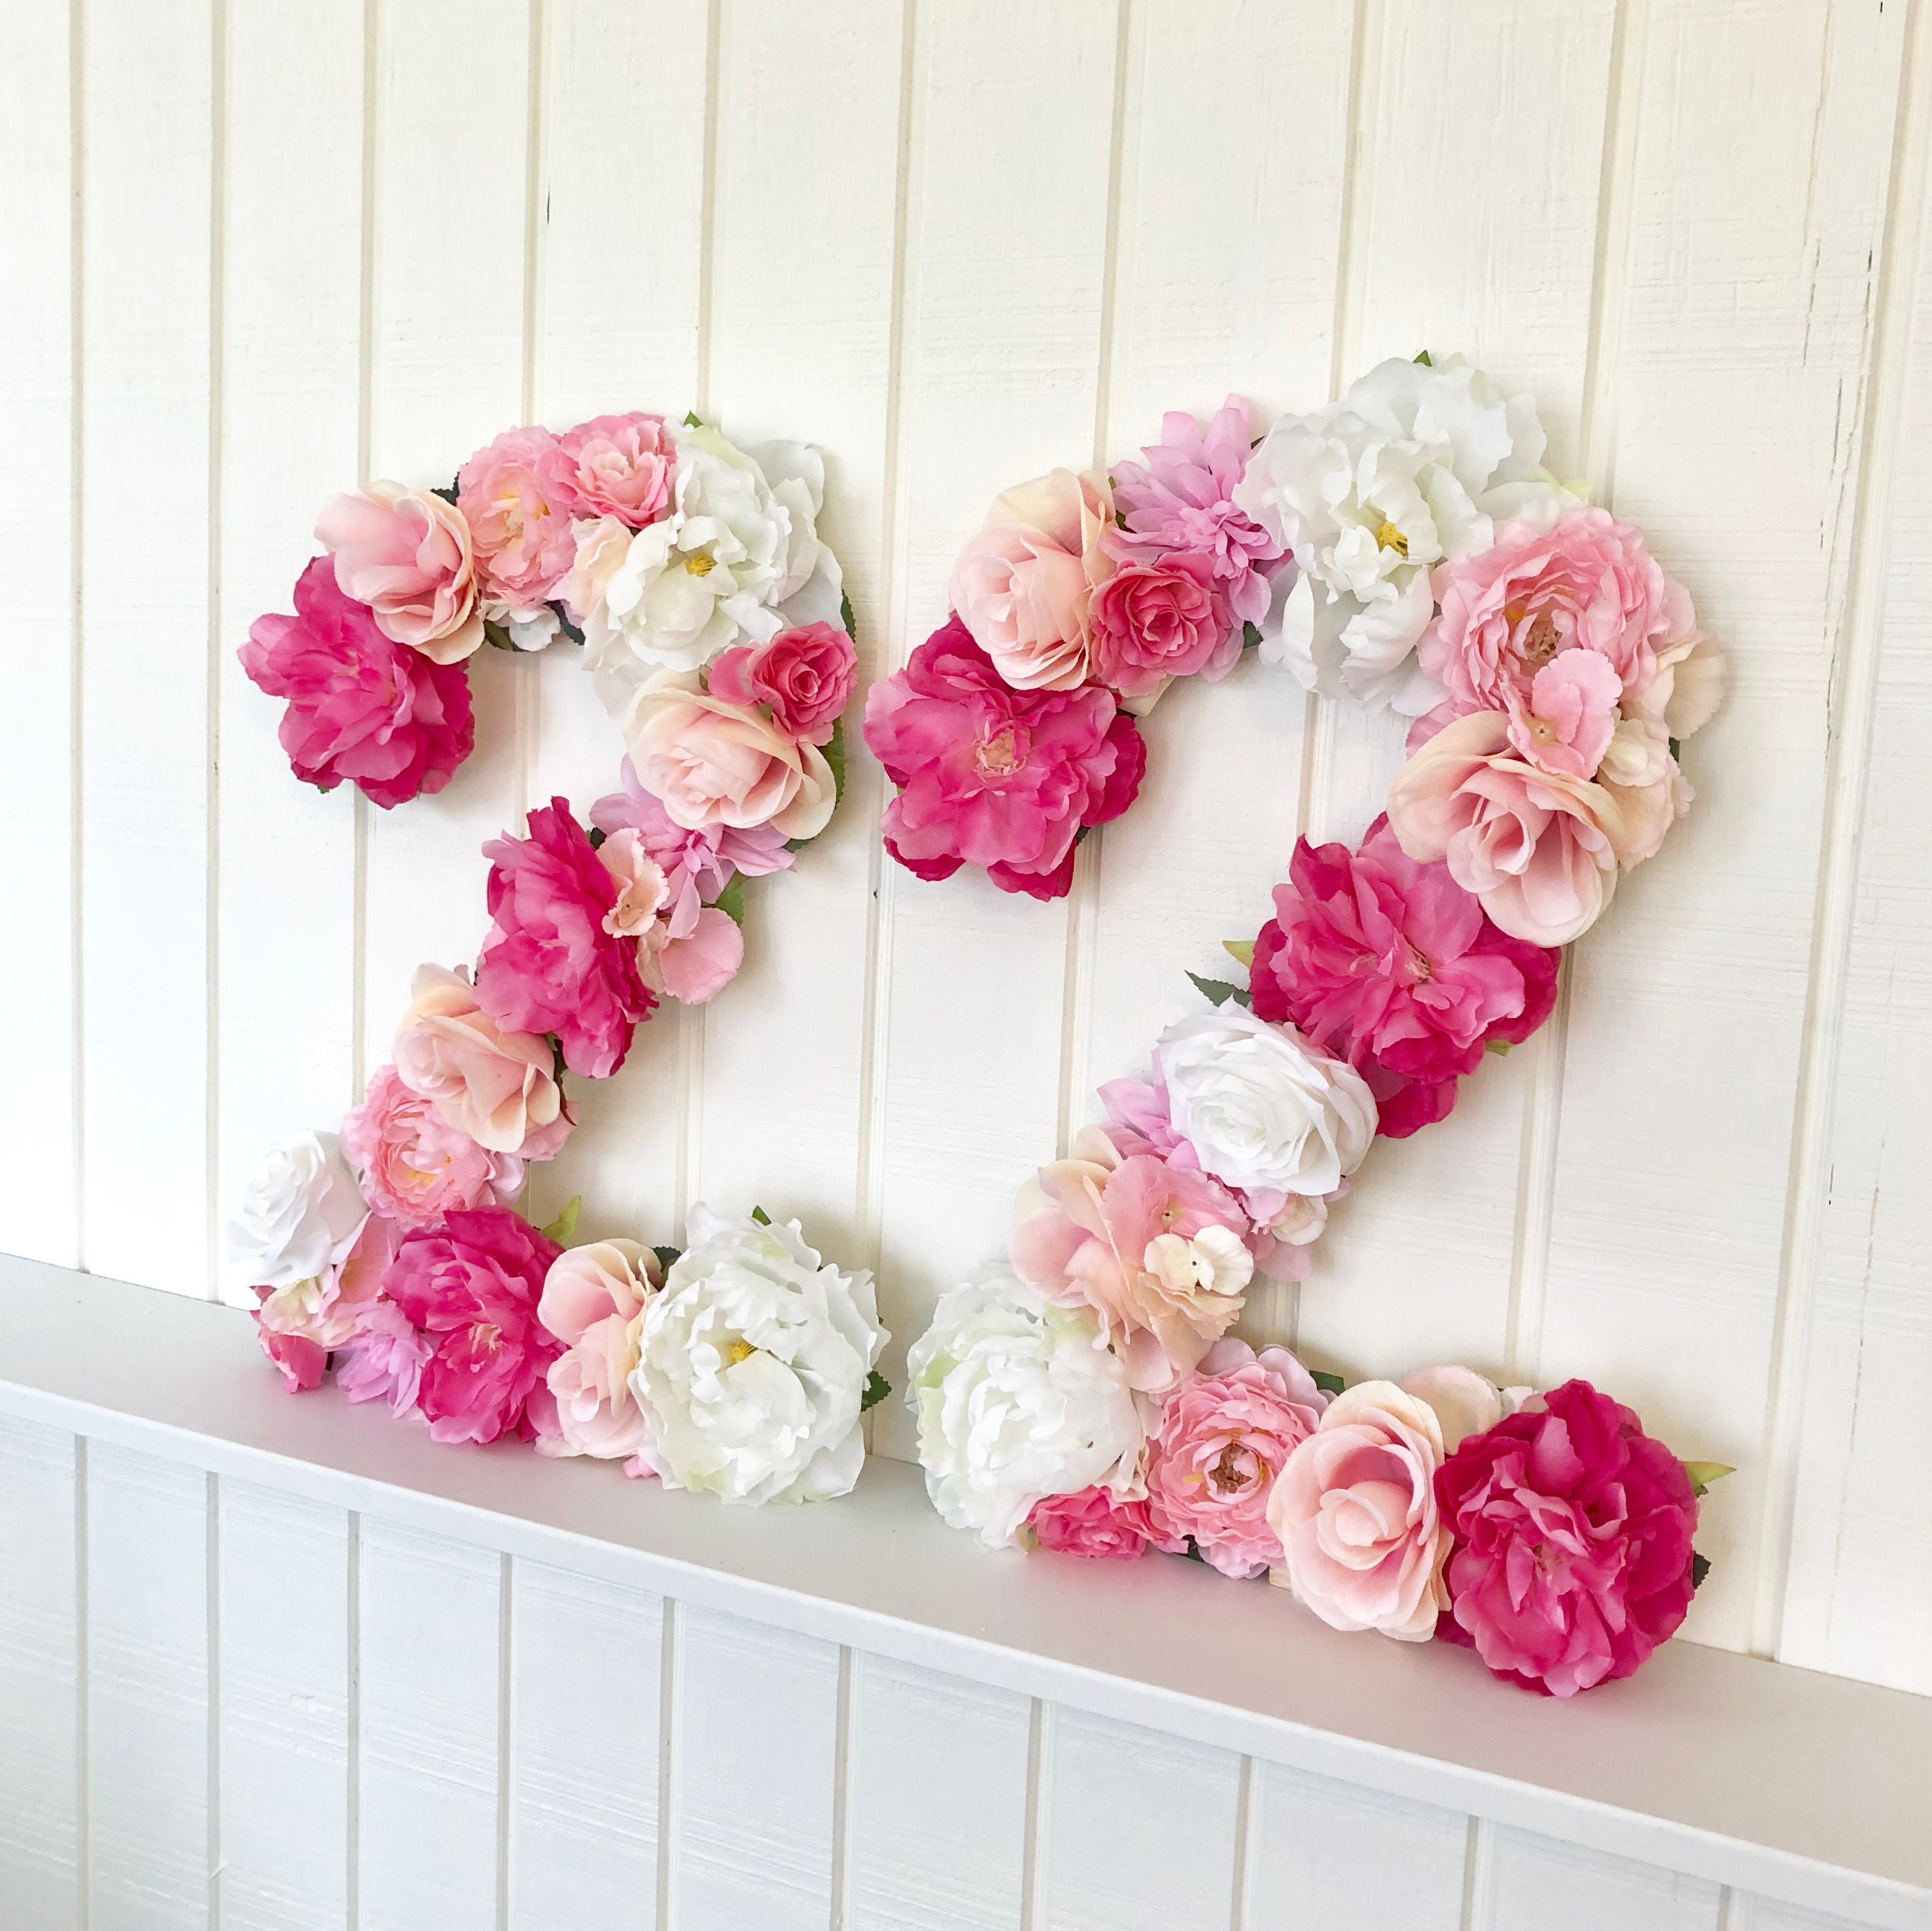 21st Birthday Decor, Floral Number, Party 1st First Birthday, Pink Photo Shoot